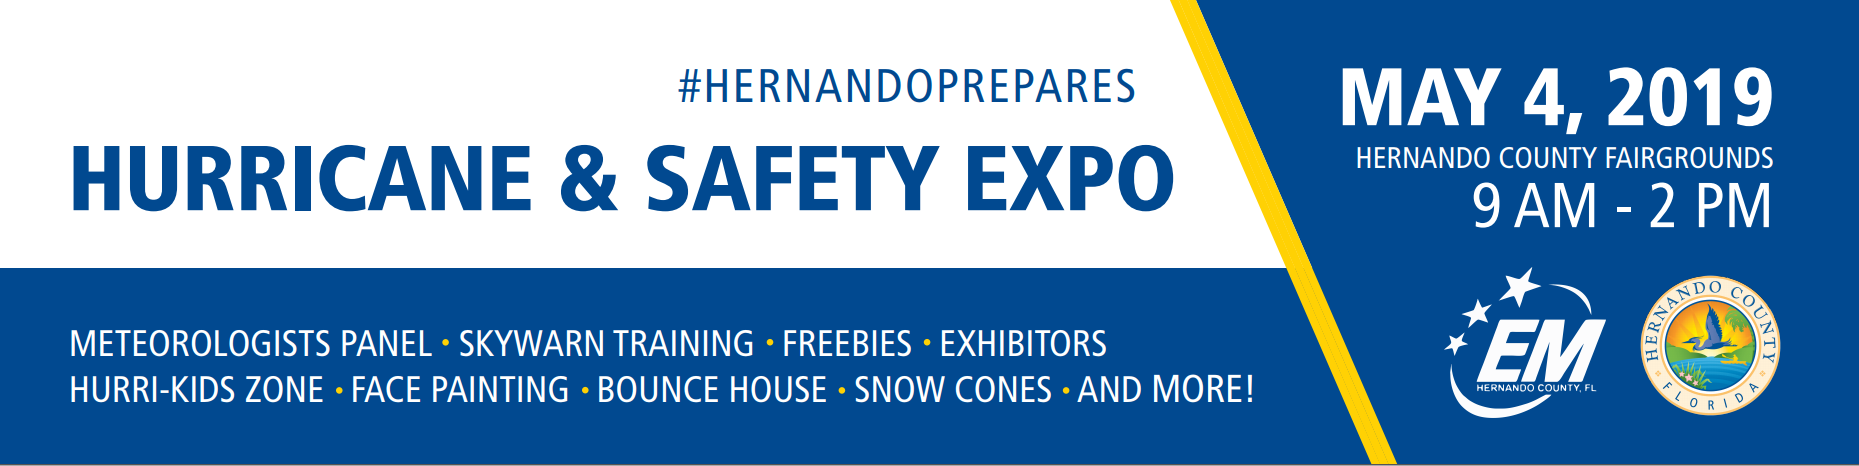 Banner image of #HernandoPrepares May 4, 2019 9 a.m.-2 p.m. at the Hernando County Fairgrounds image